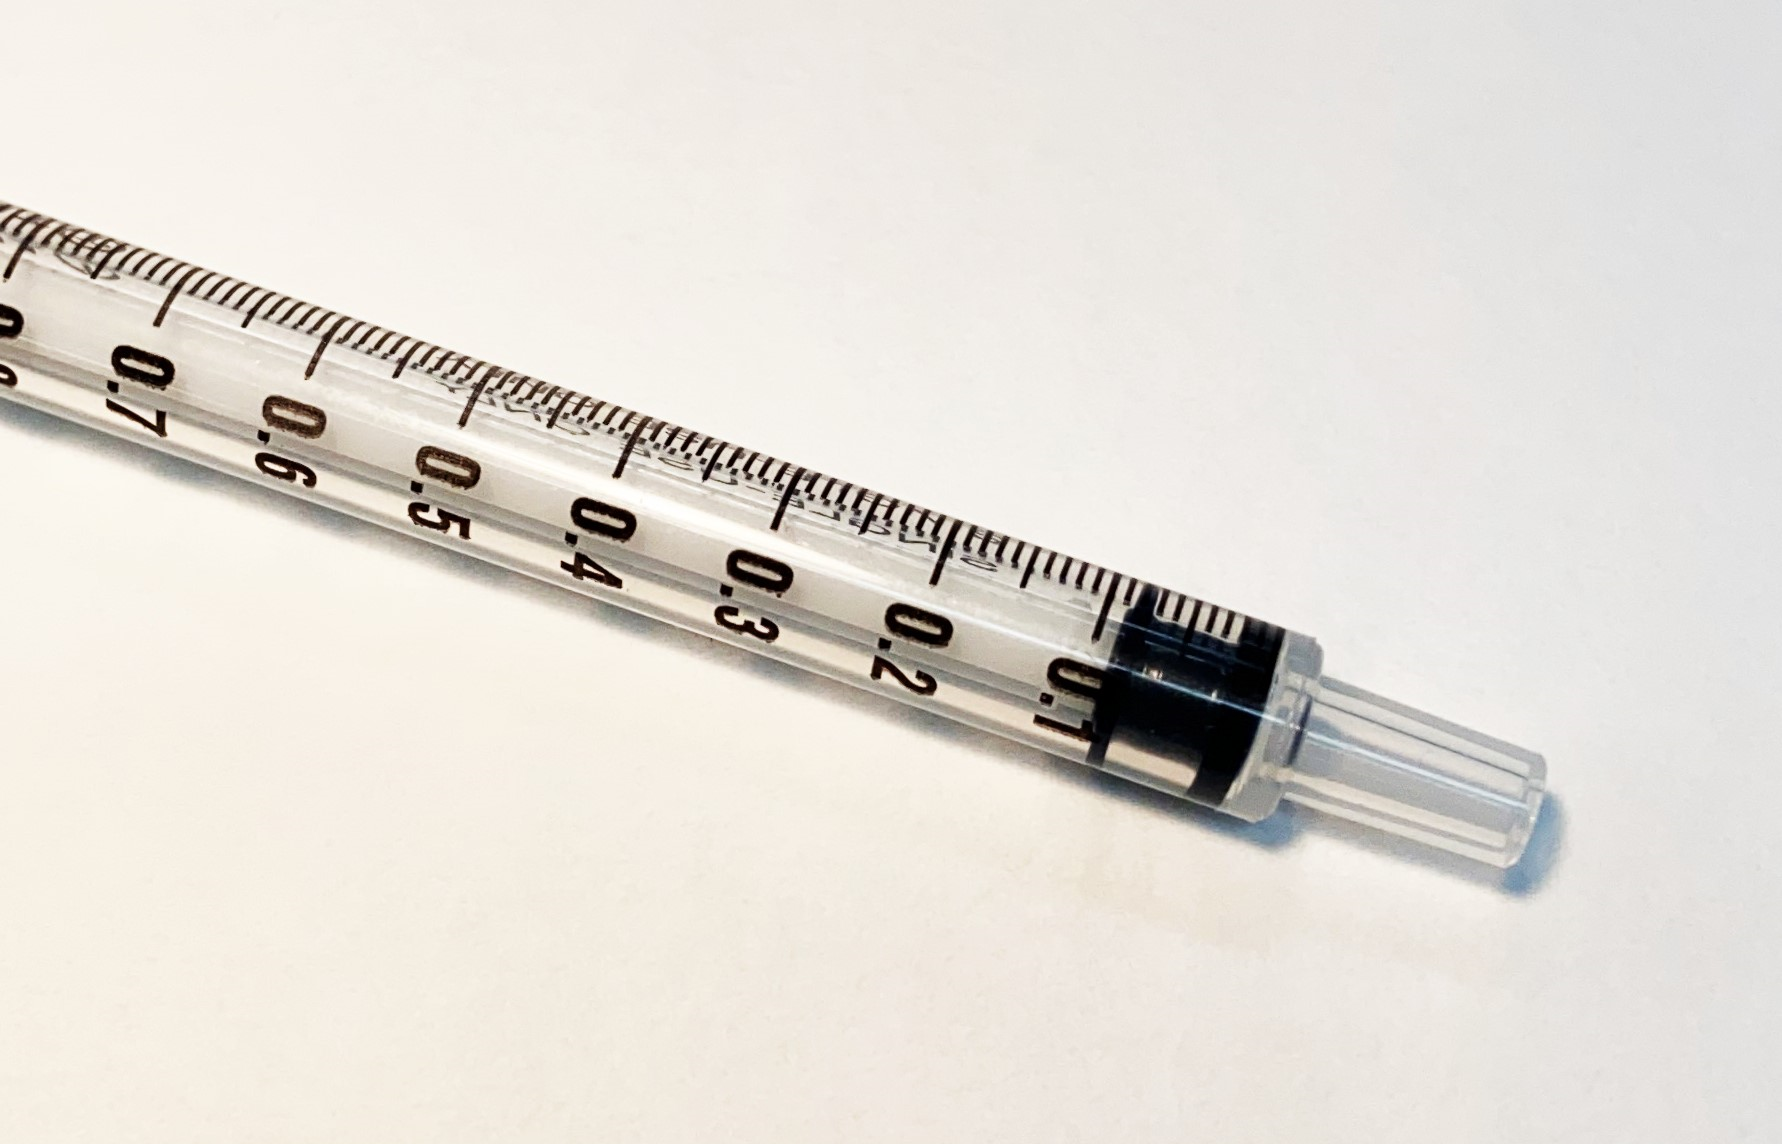 A 1 ml Luer lock style syringe with 0.1 ml major increments each subdivided into 0.01 ml gradations.